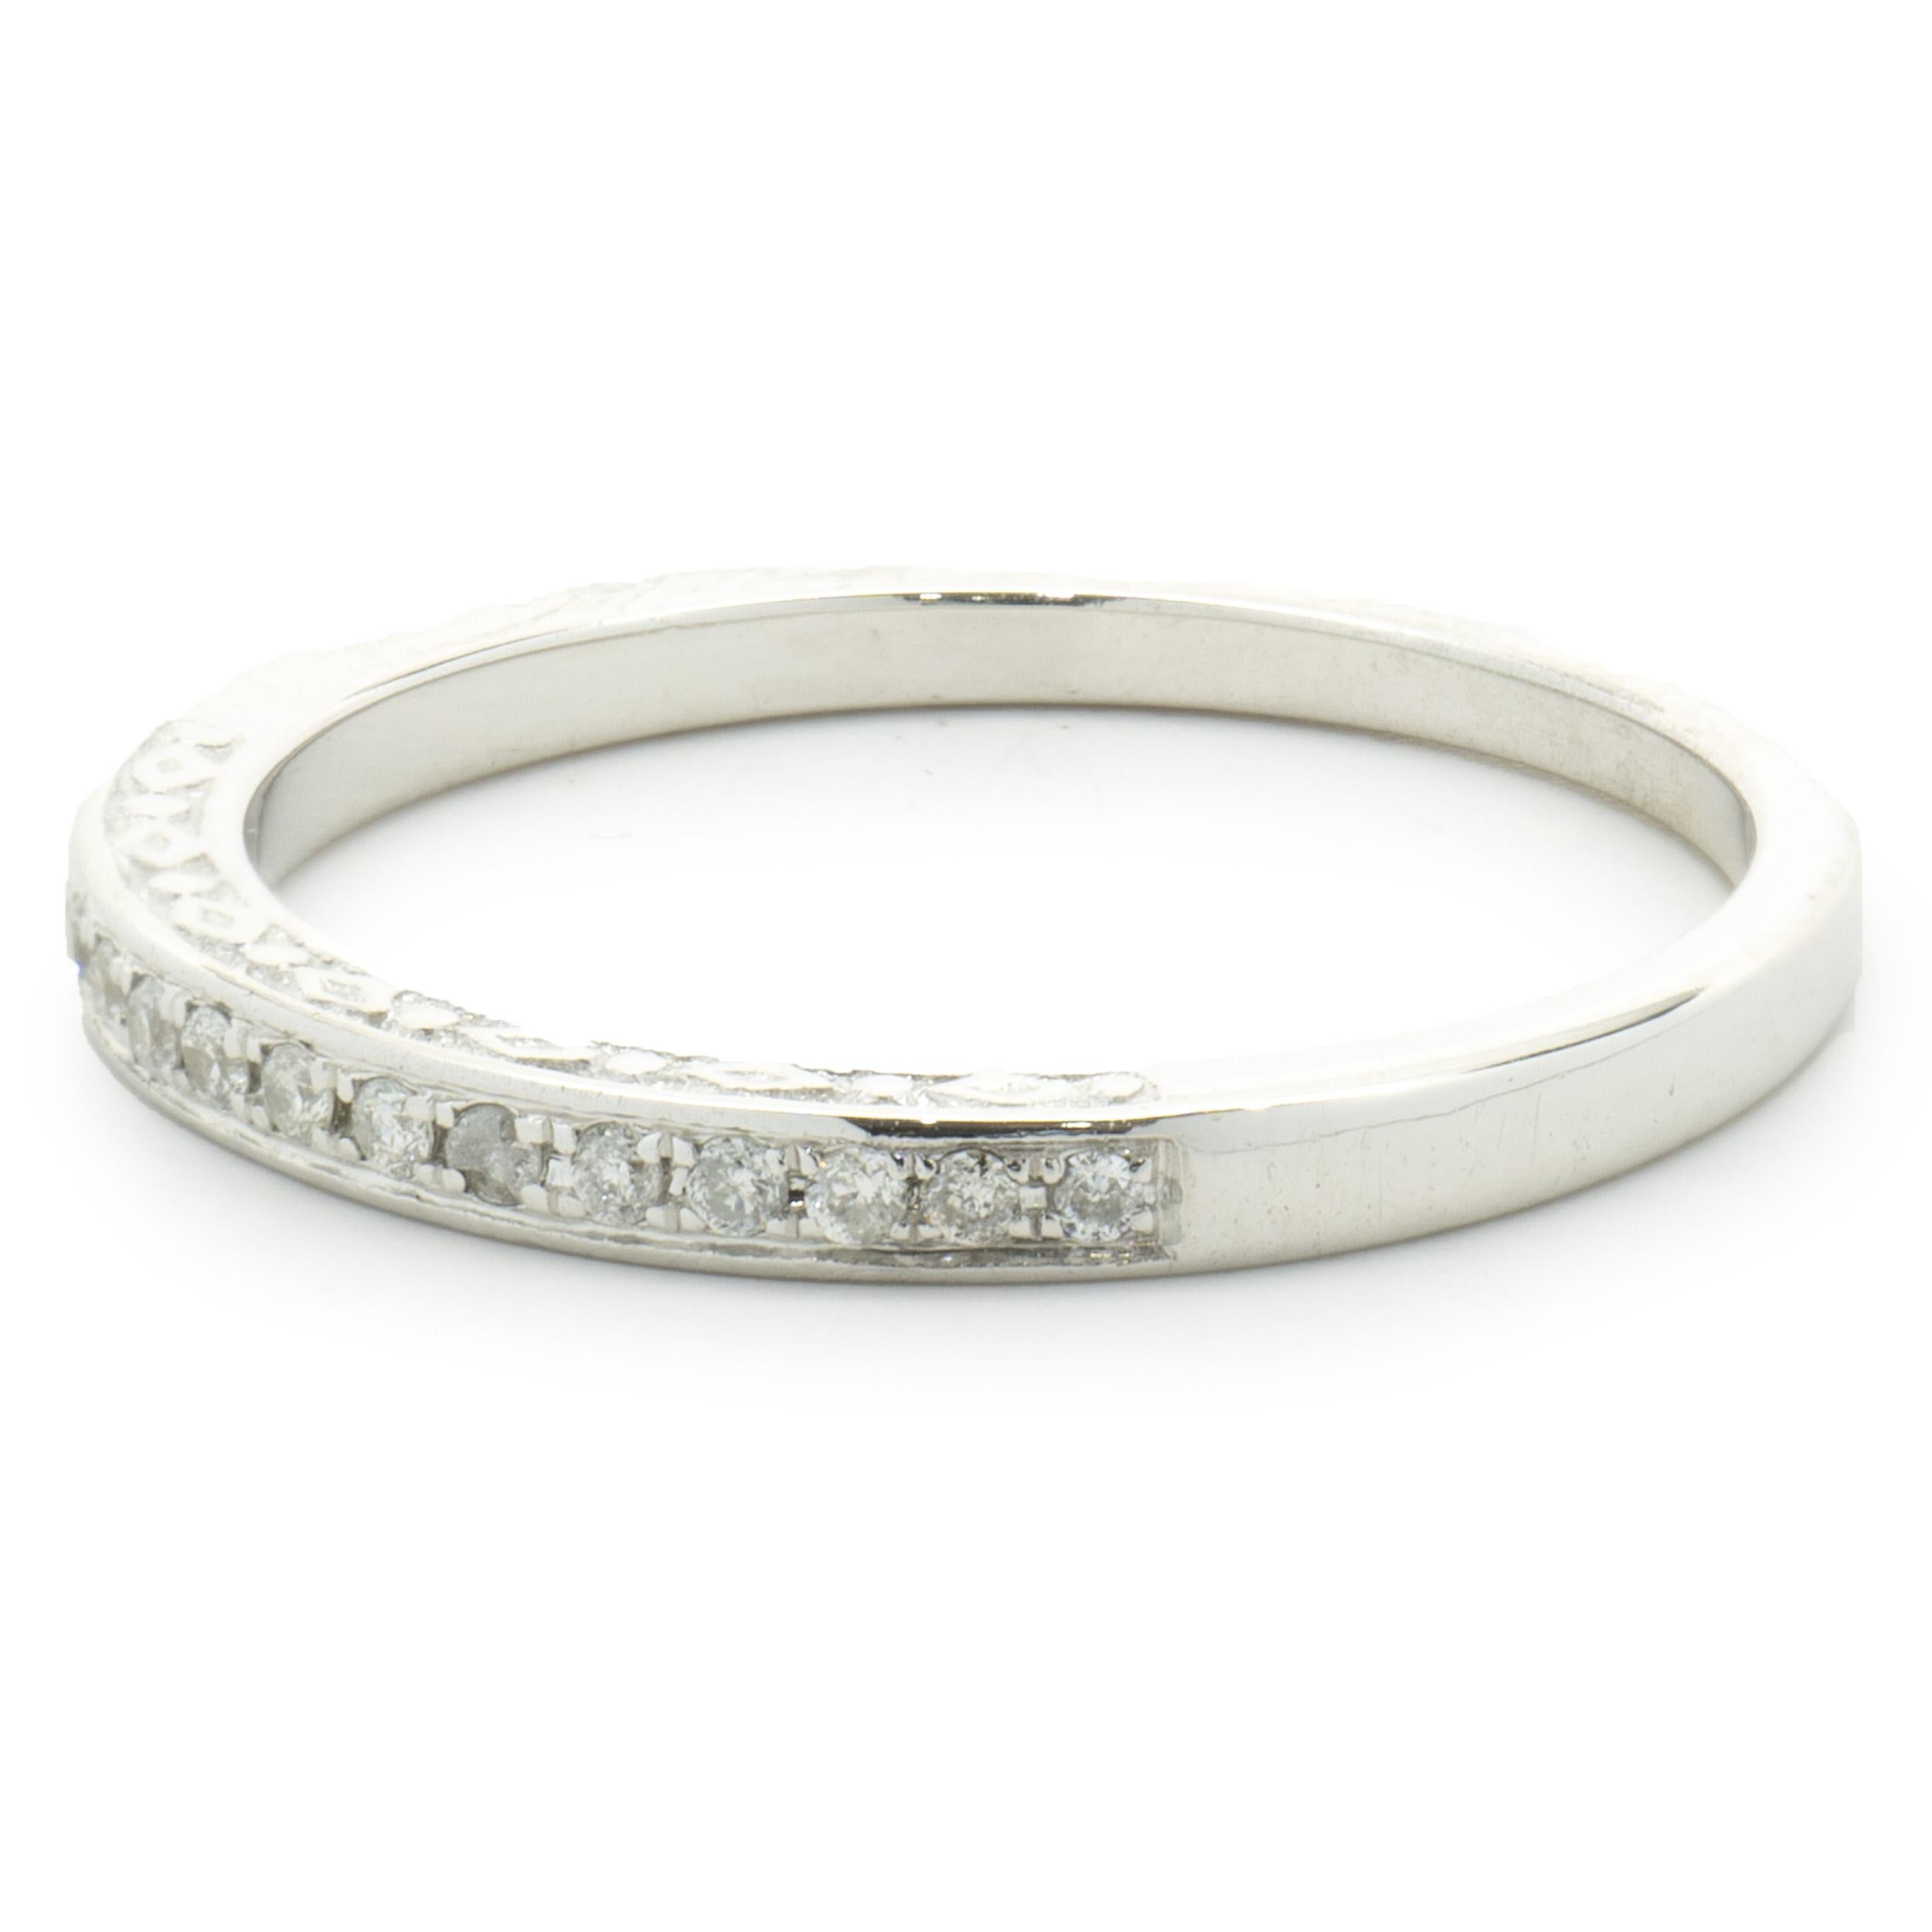 10 Karat White Gold Diamond Band In Excellent Condition For Sale In Scottsdale, AZ